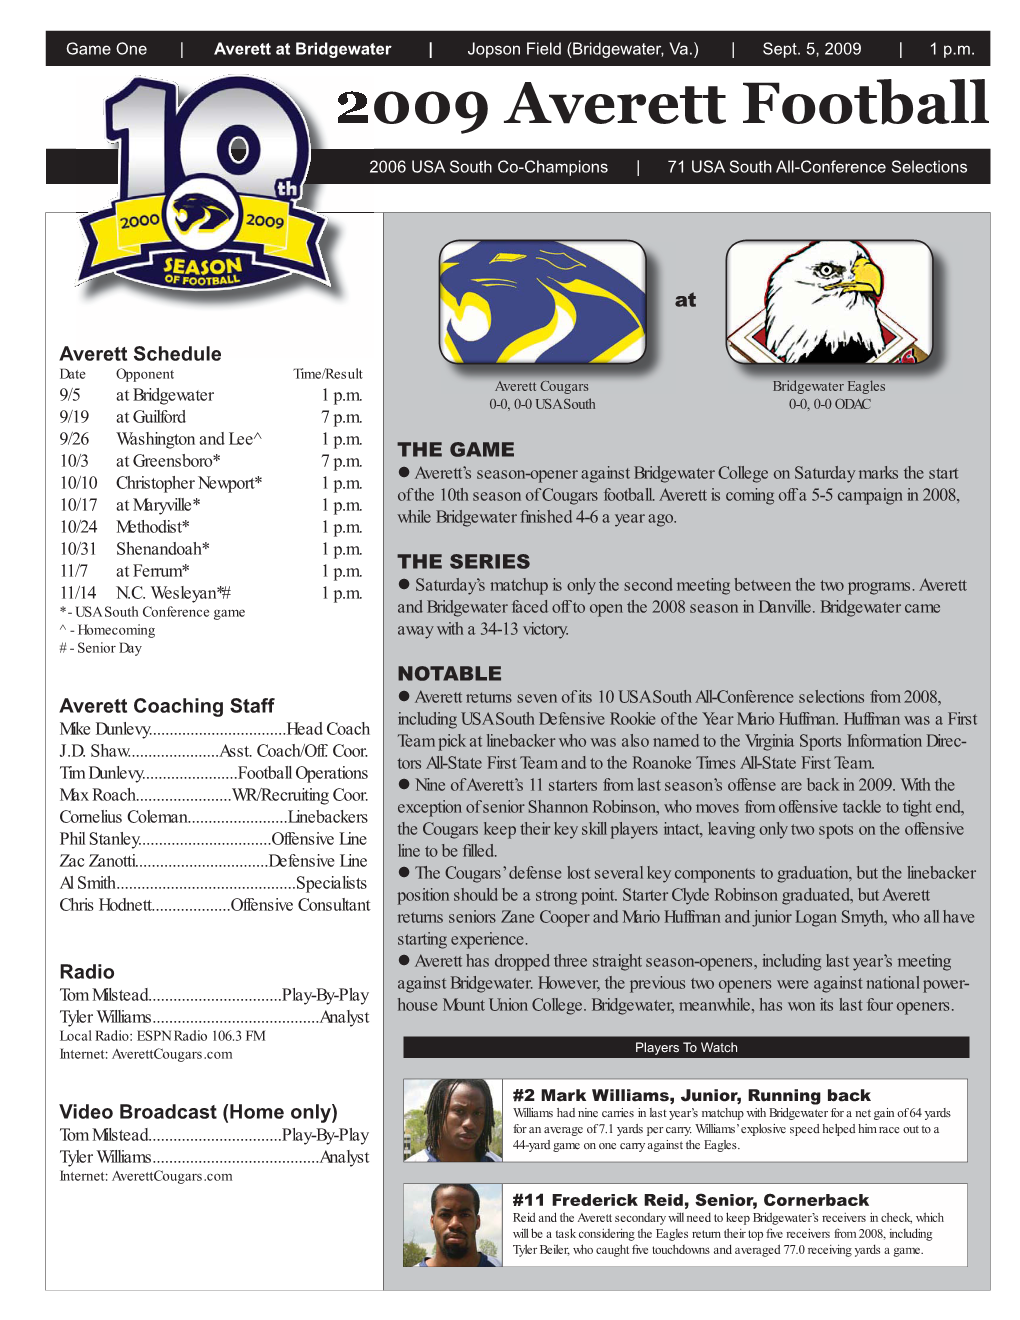 Football Game Notes 2009.Indd